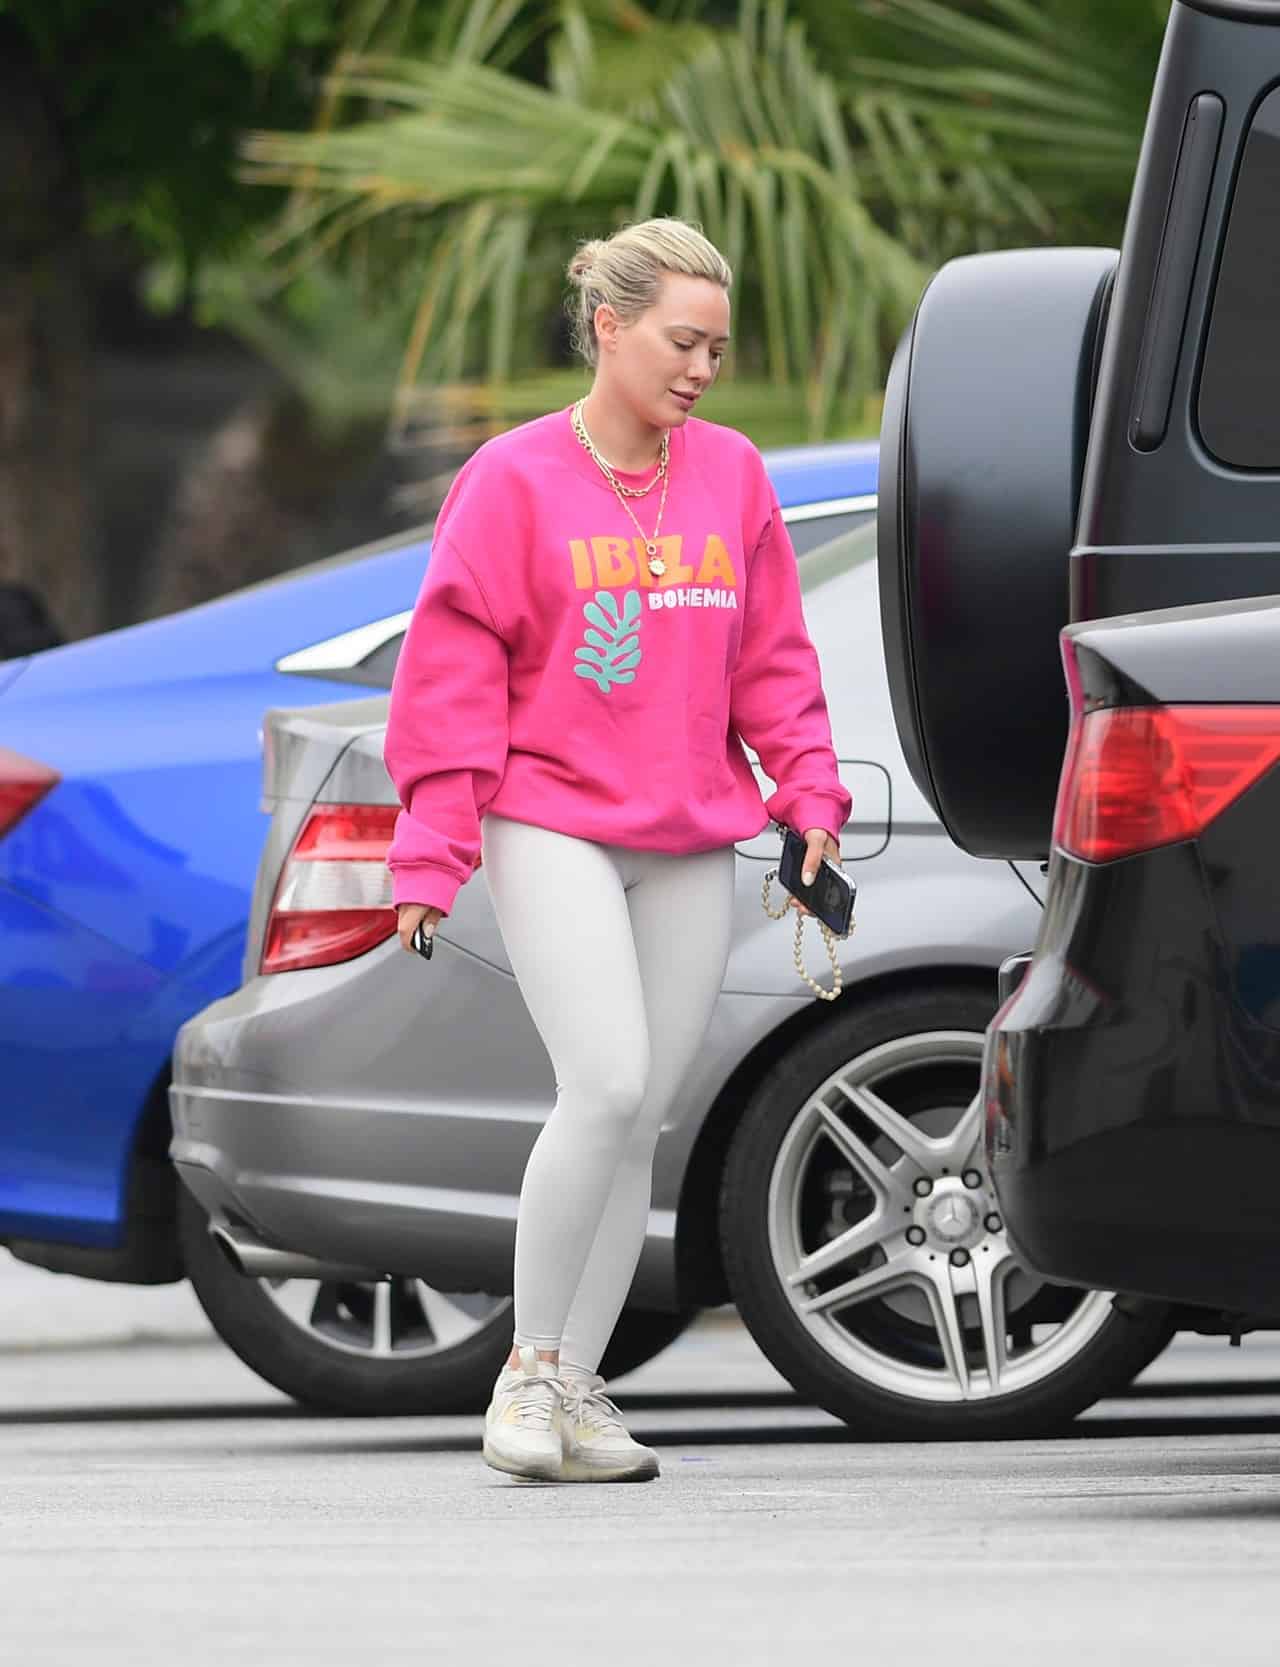 Hilary Duff Flaunting Her Athleisure Style as She Runs LA Errands